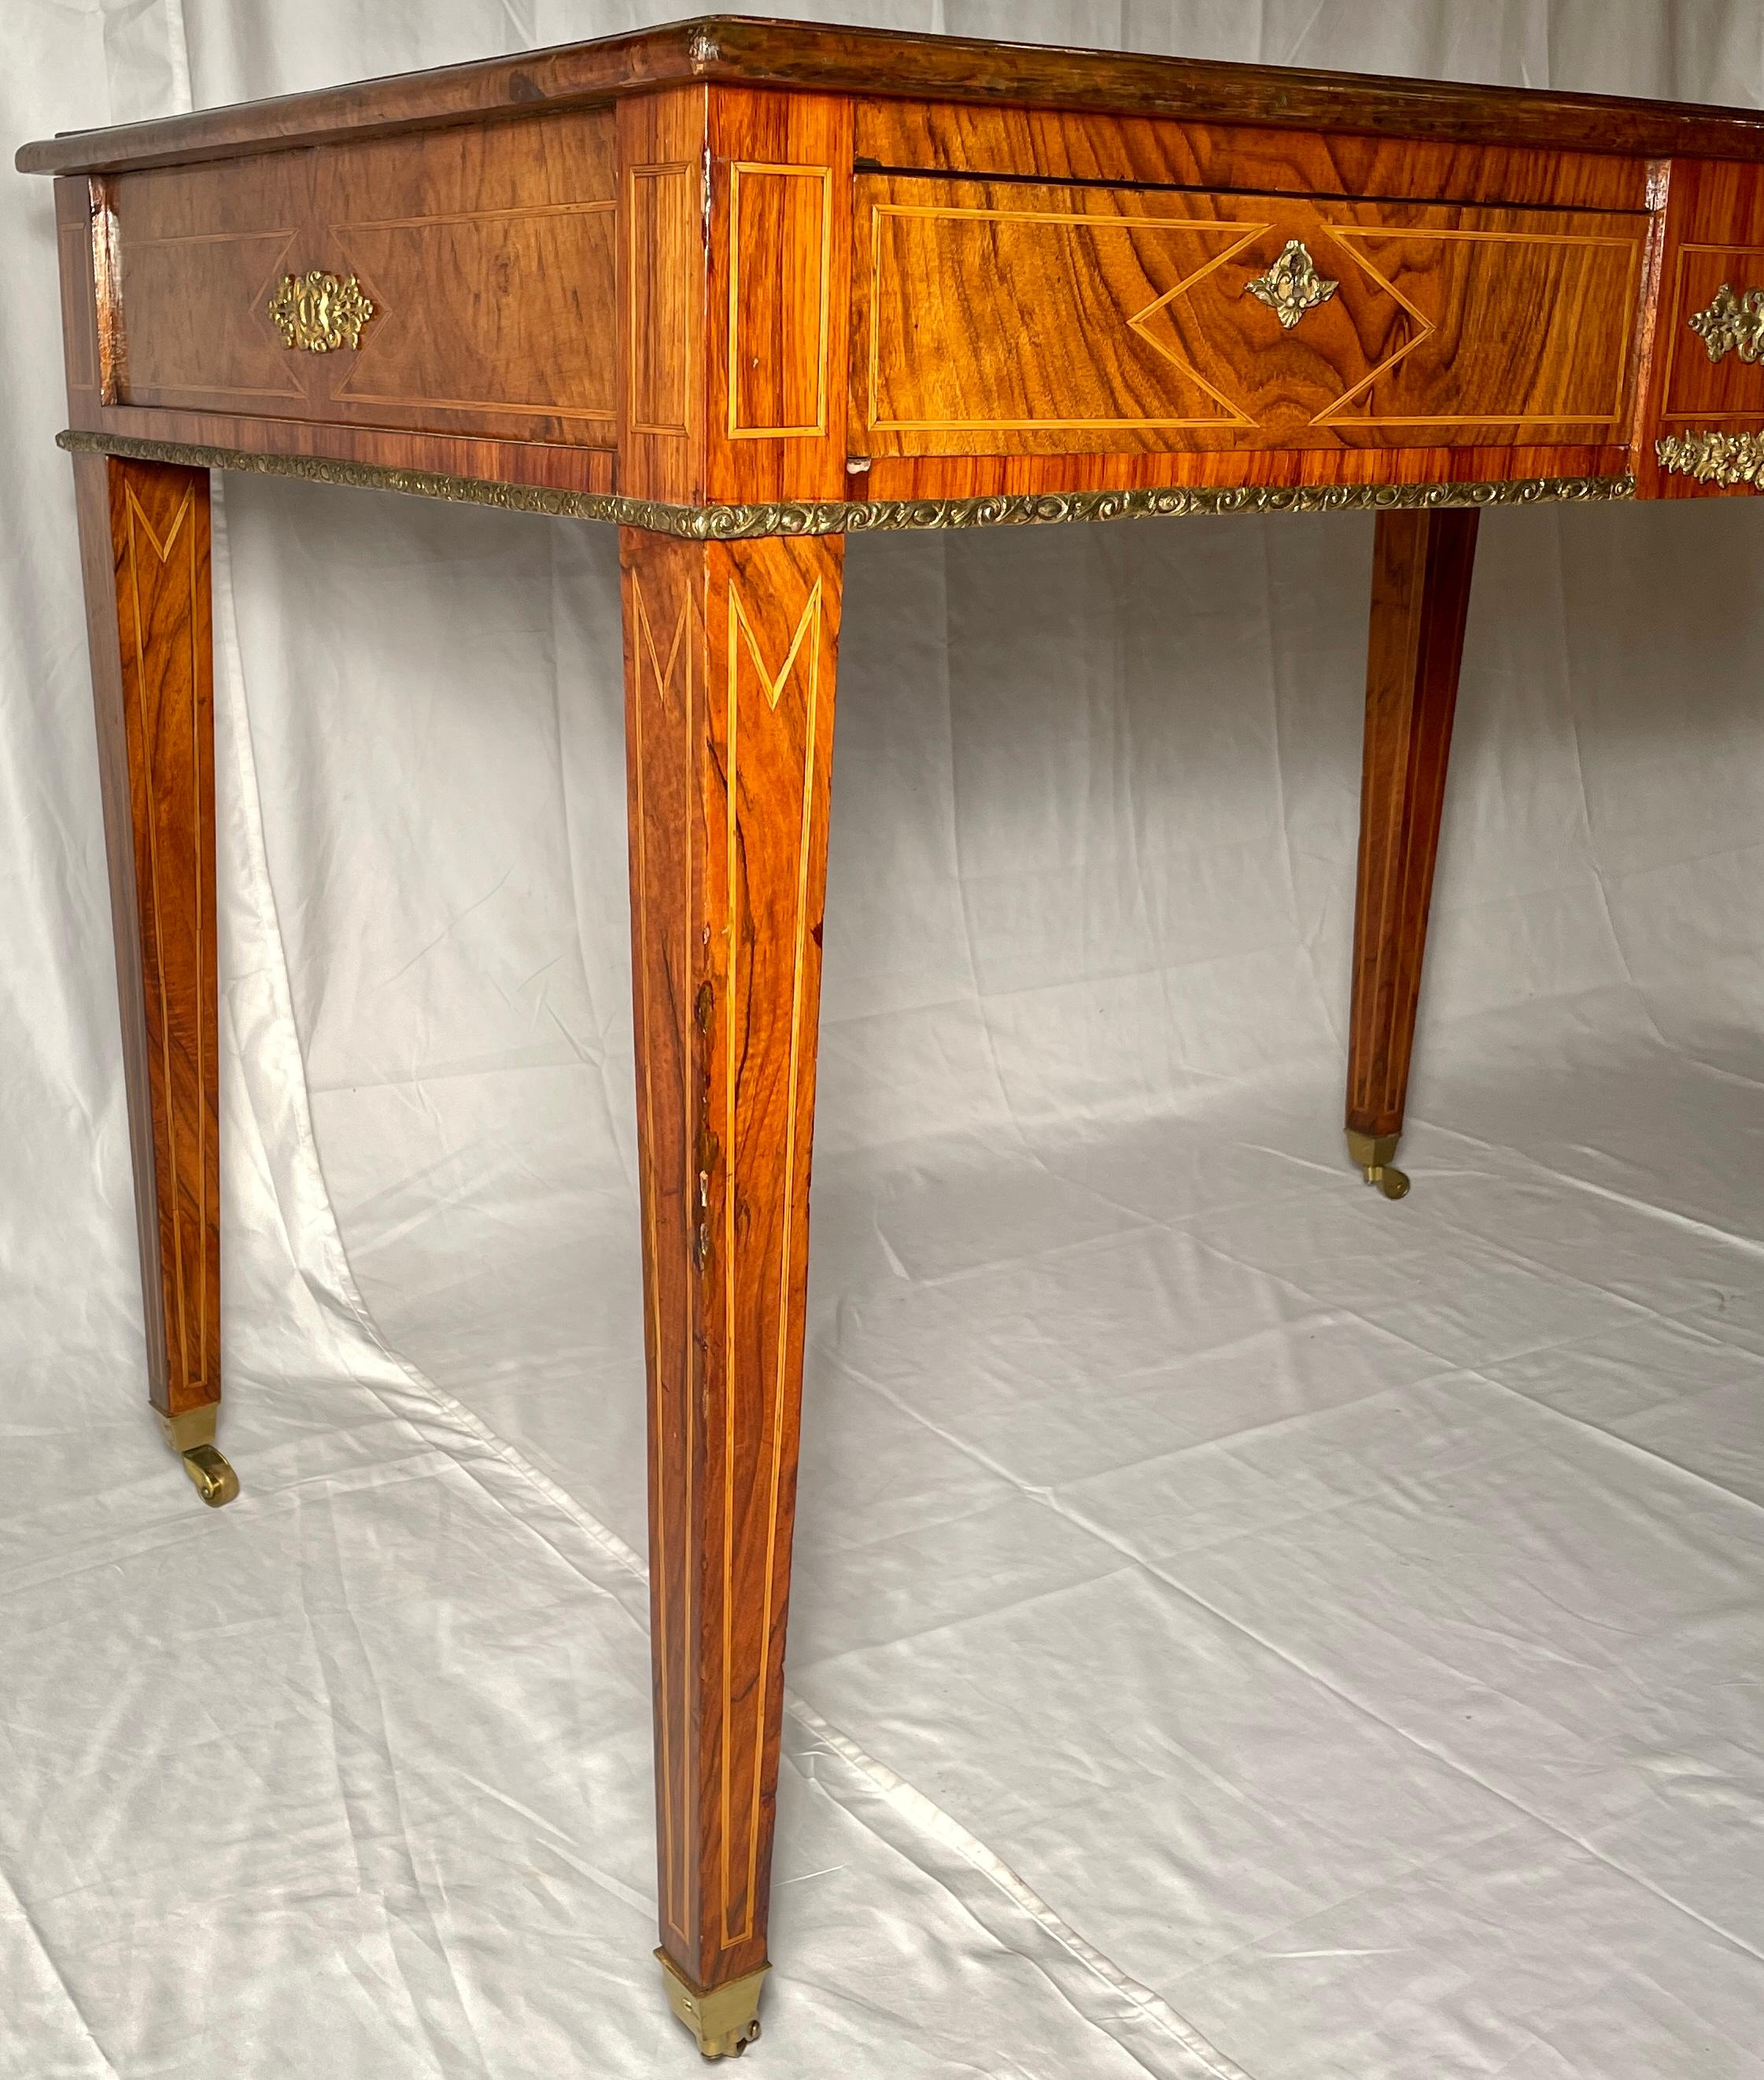 Antique English Inlaid Walnut and Gold Bronze Mounted Writing Desk, Circa 1880 For Sale 1